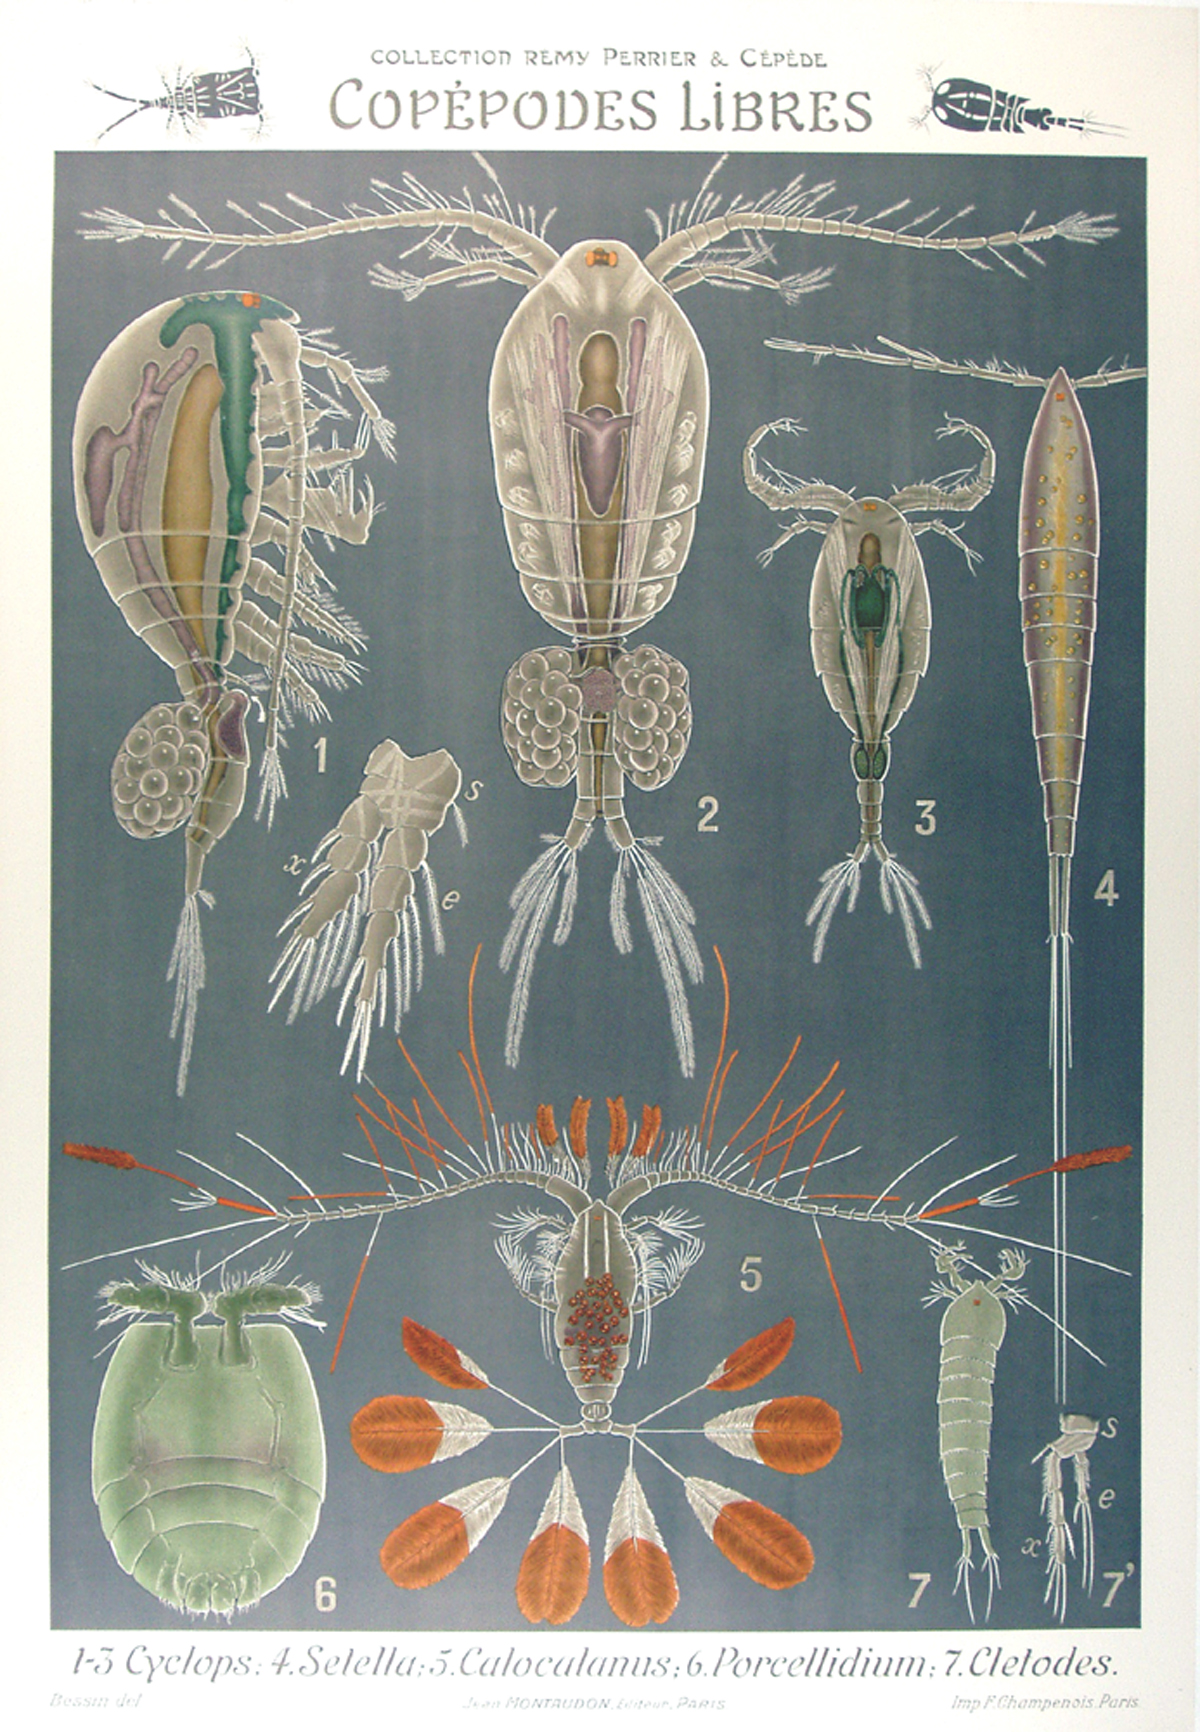 Copepodes